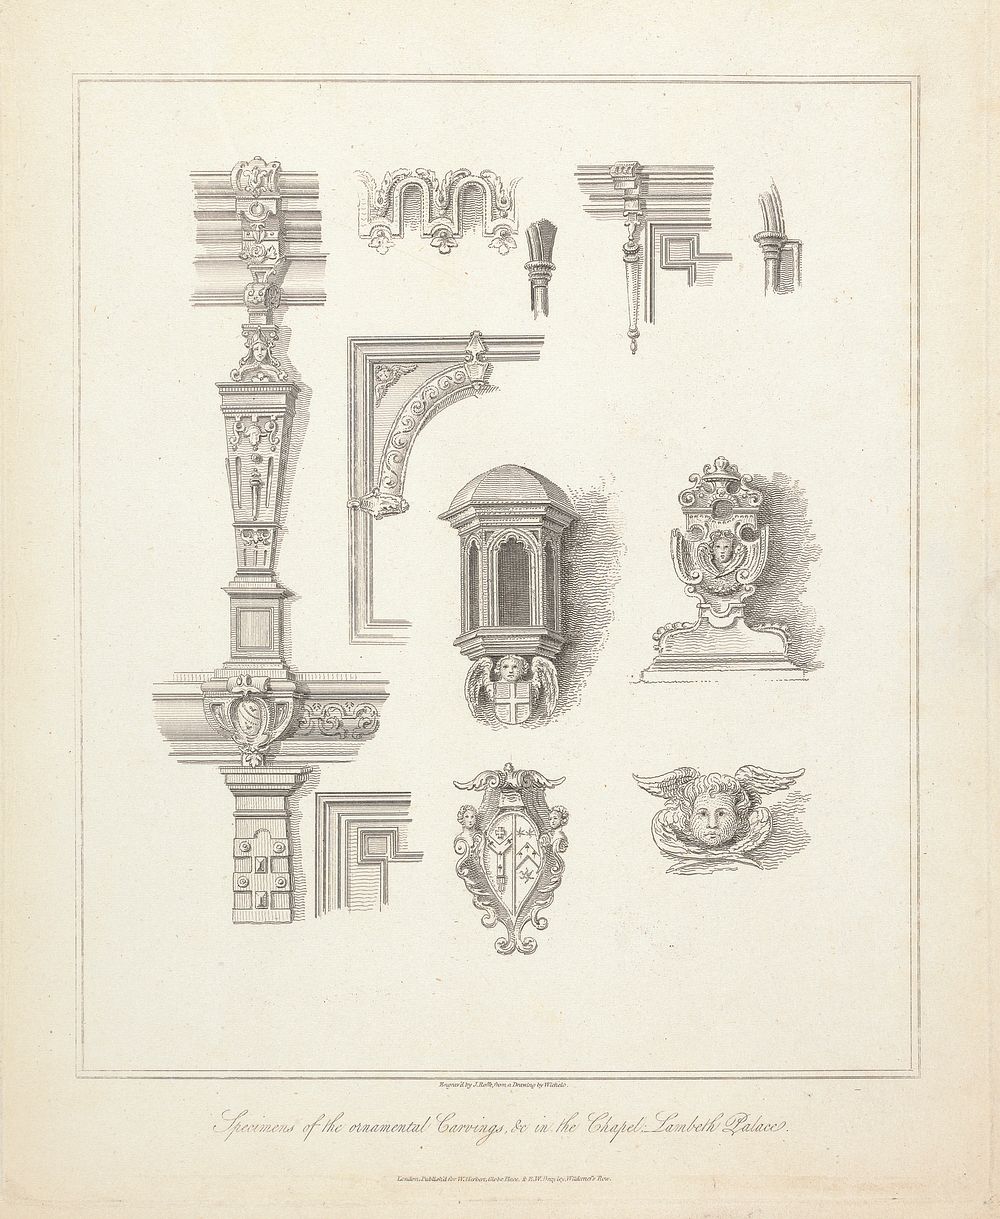 Specimens of the Ornamental Carvings and c. in the Chapel: Lambeth Palace